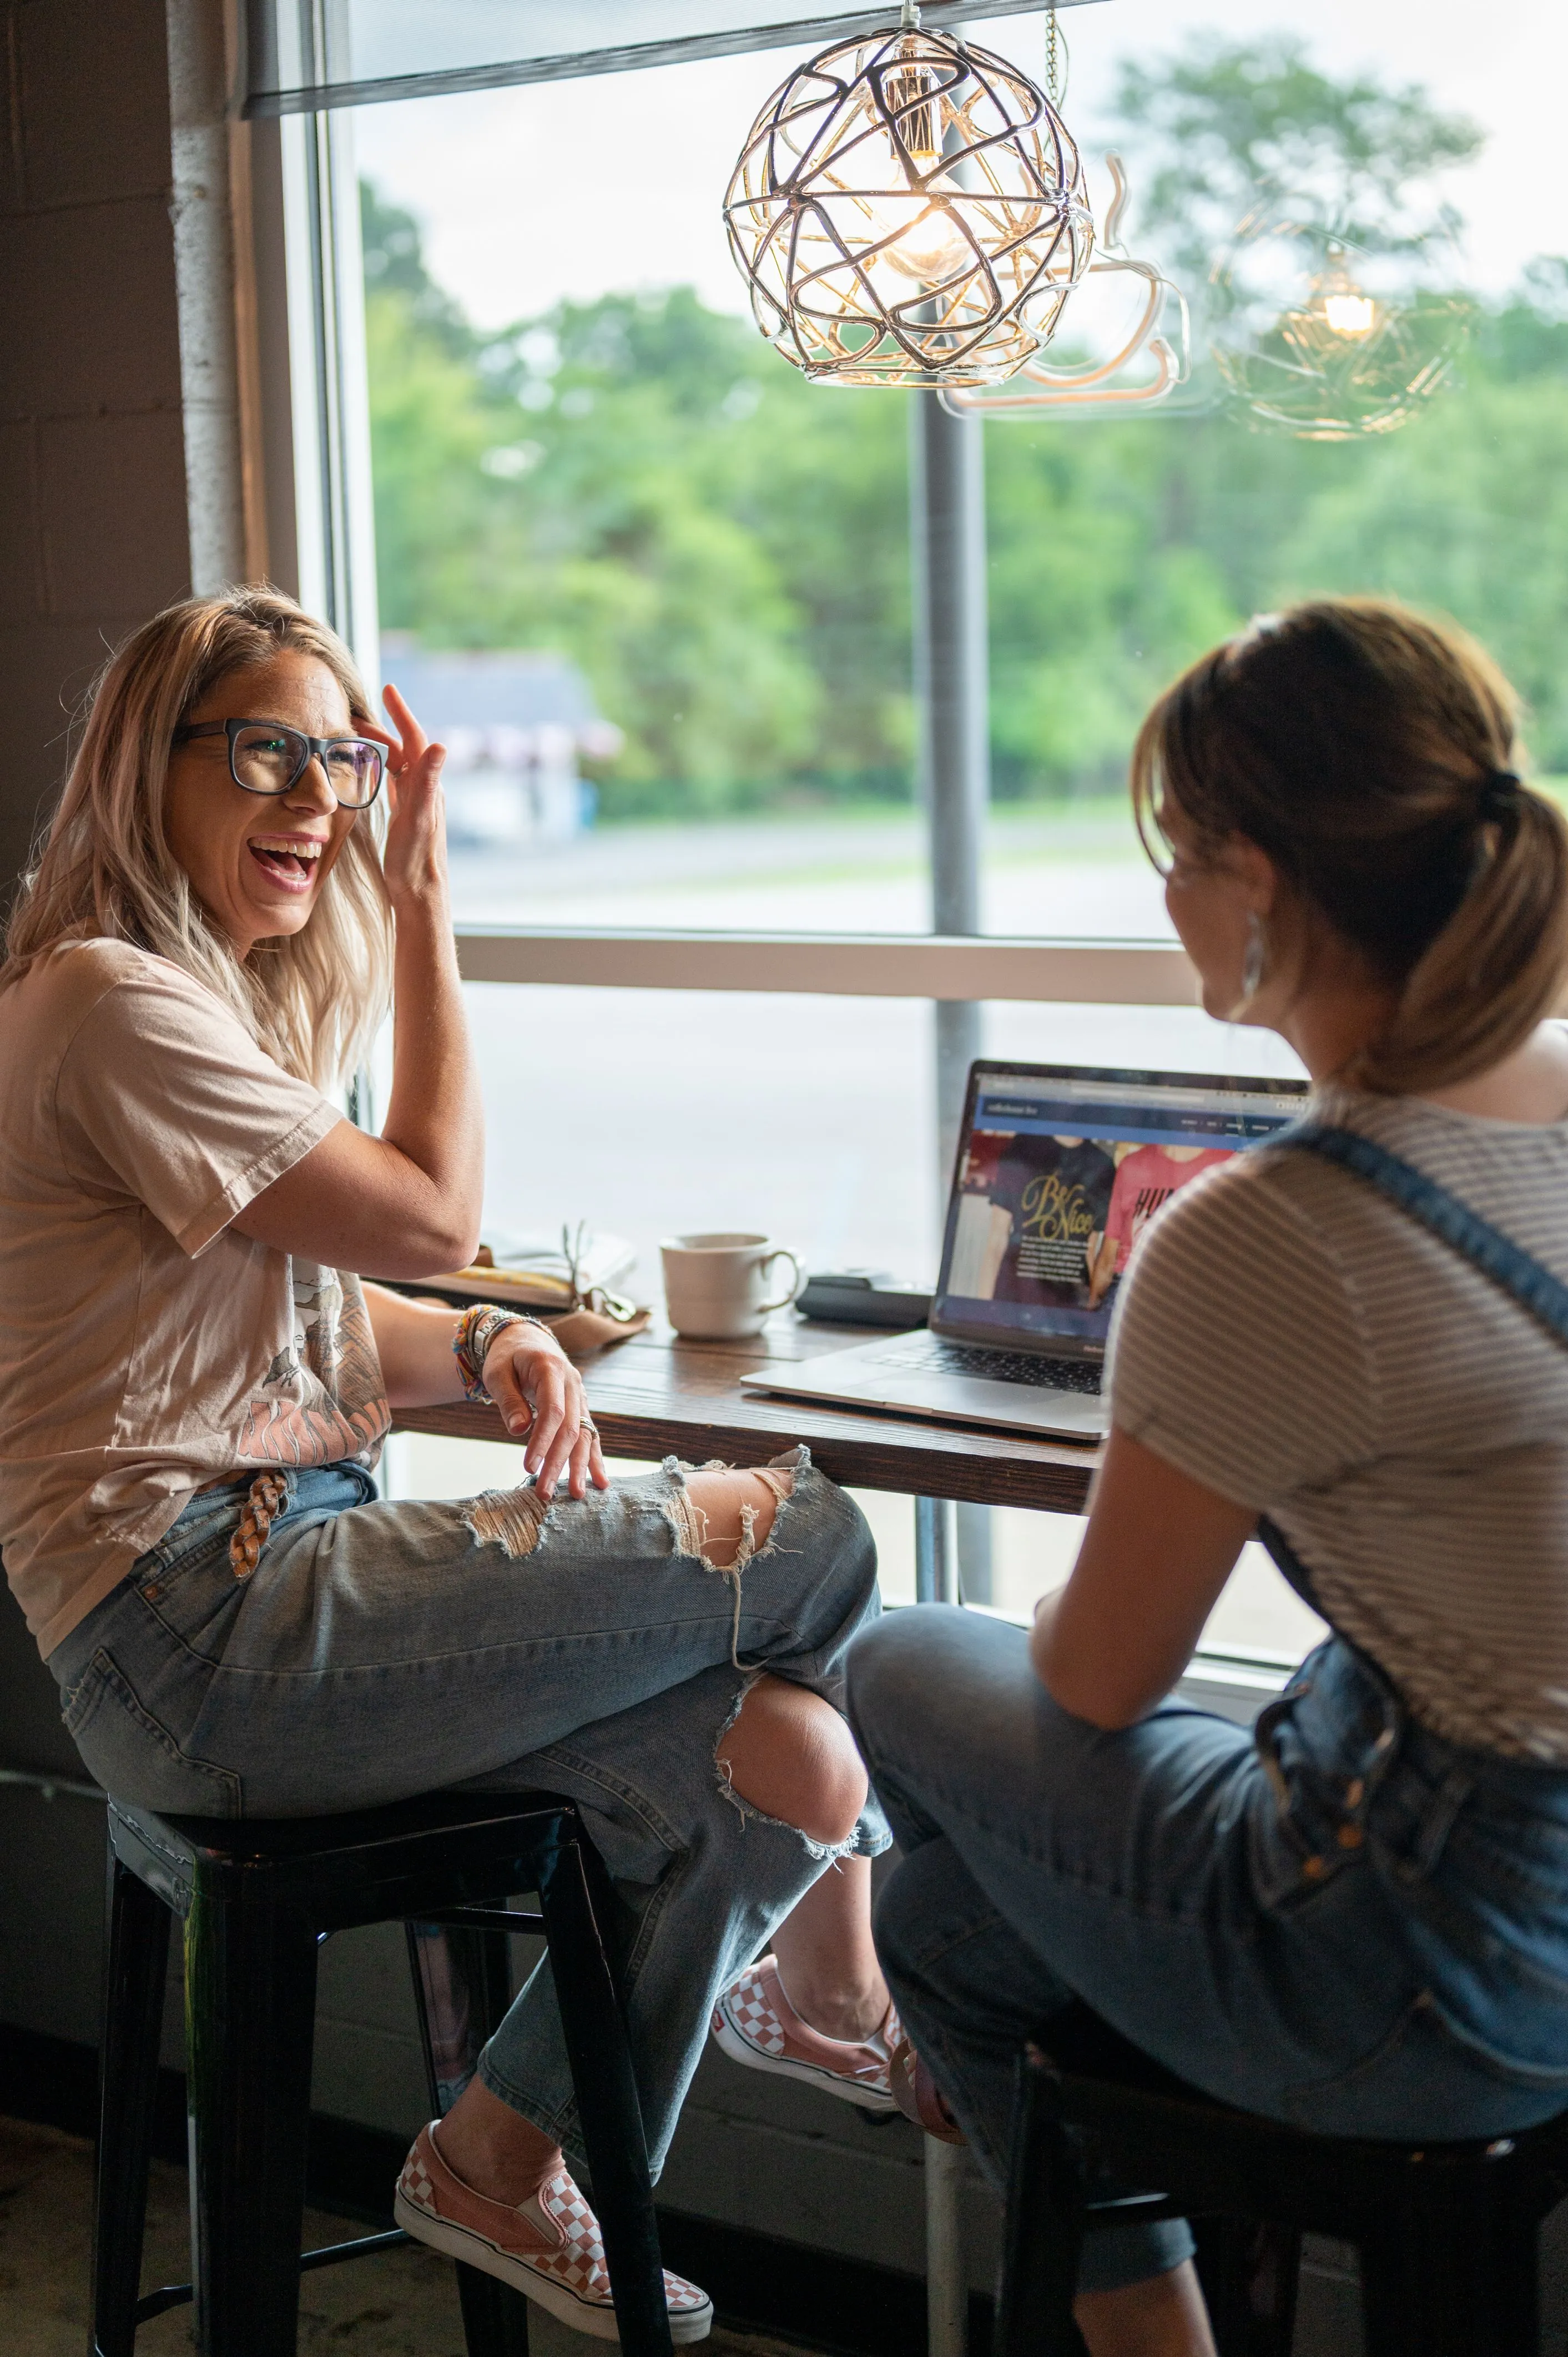 Two women seated at a cafe table beside a window, with one laughing and gesturing while the other looks at a laptop on the table.